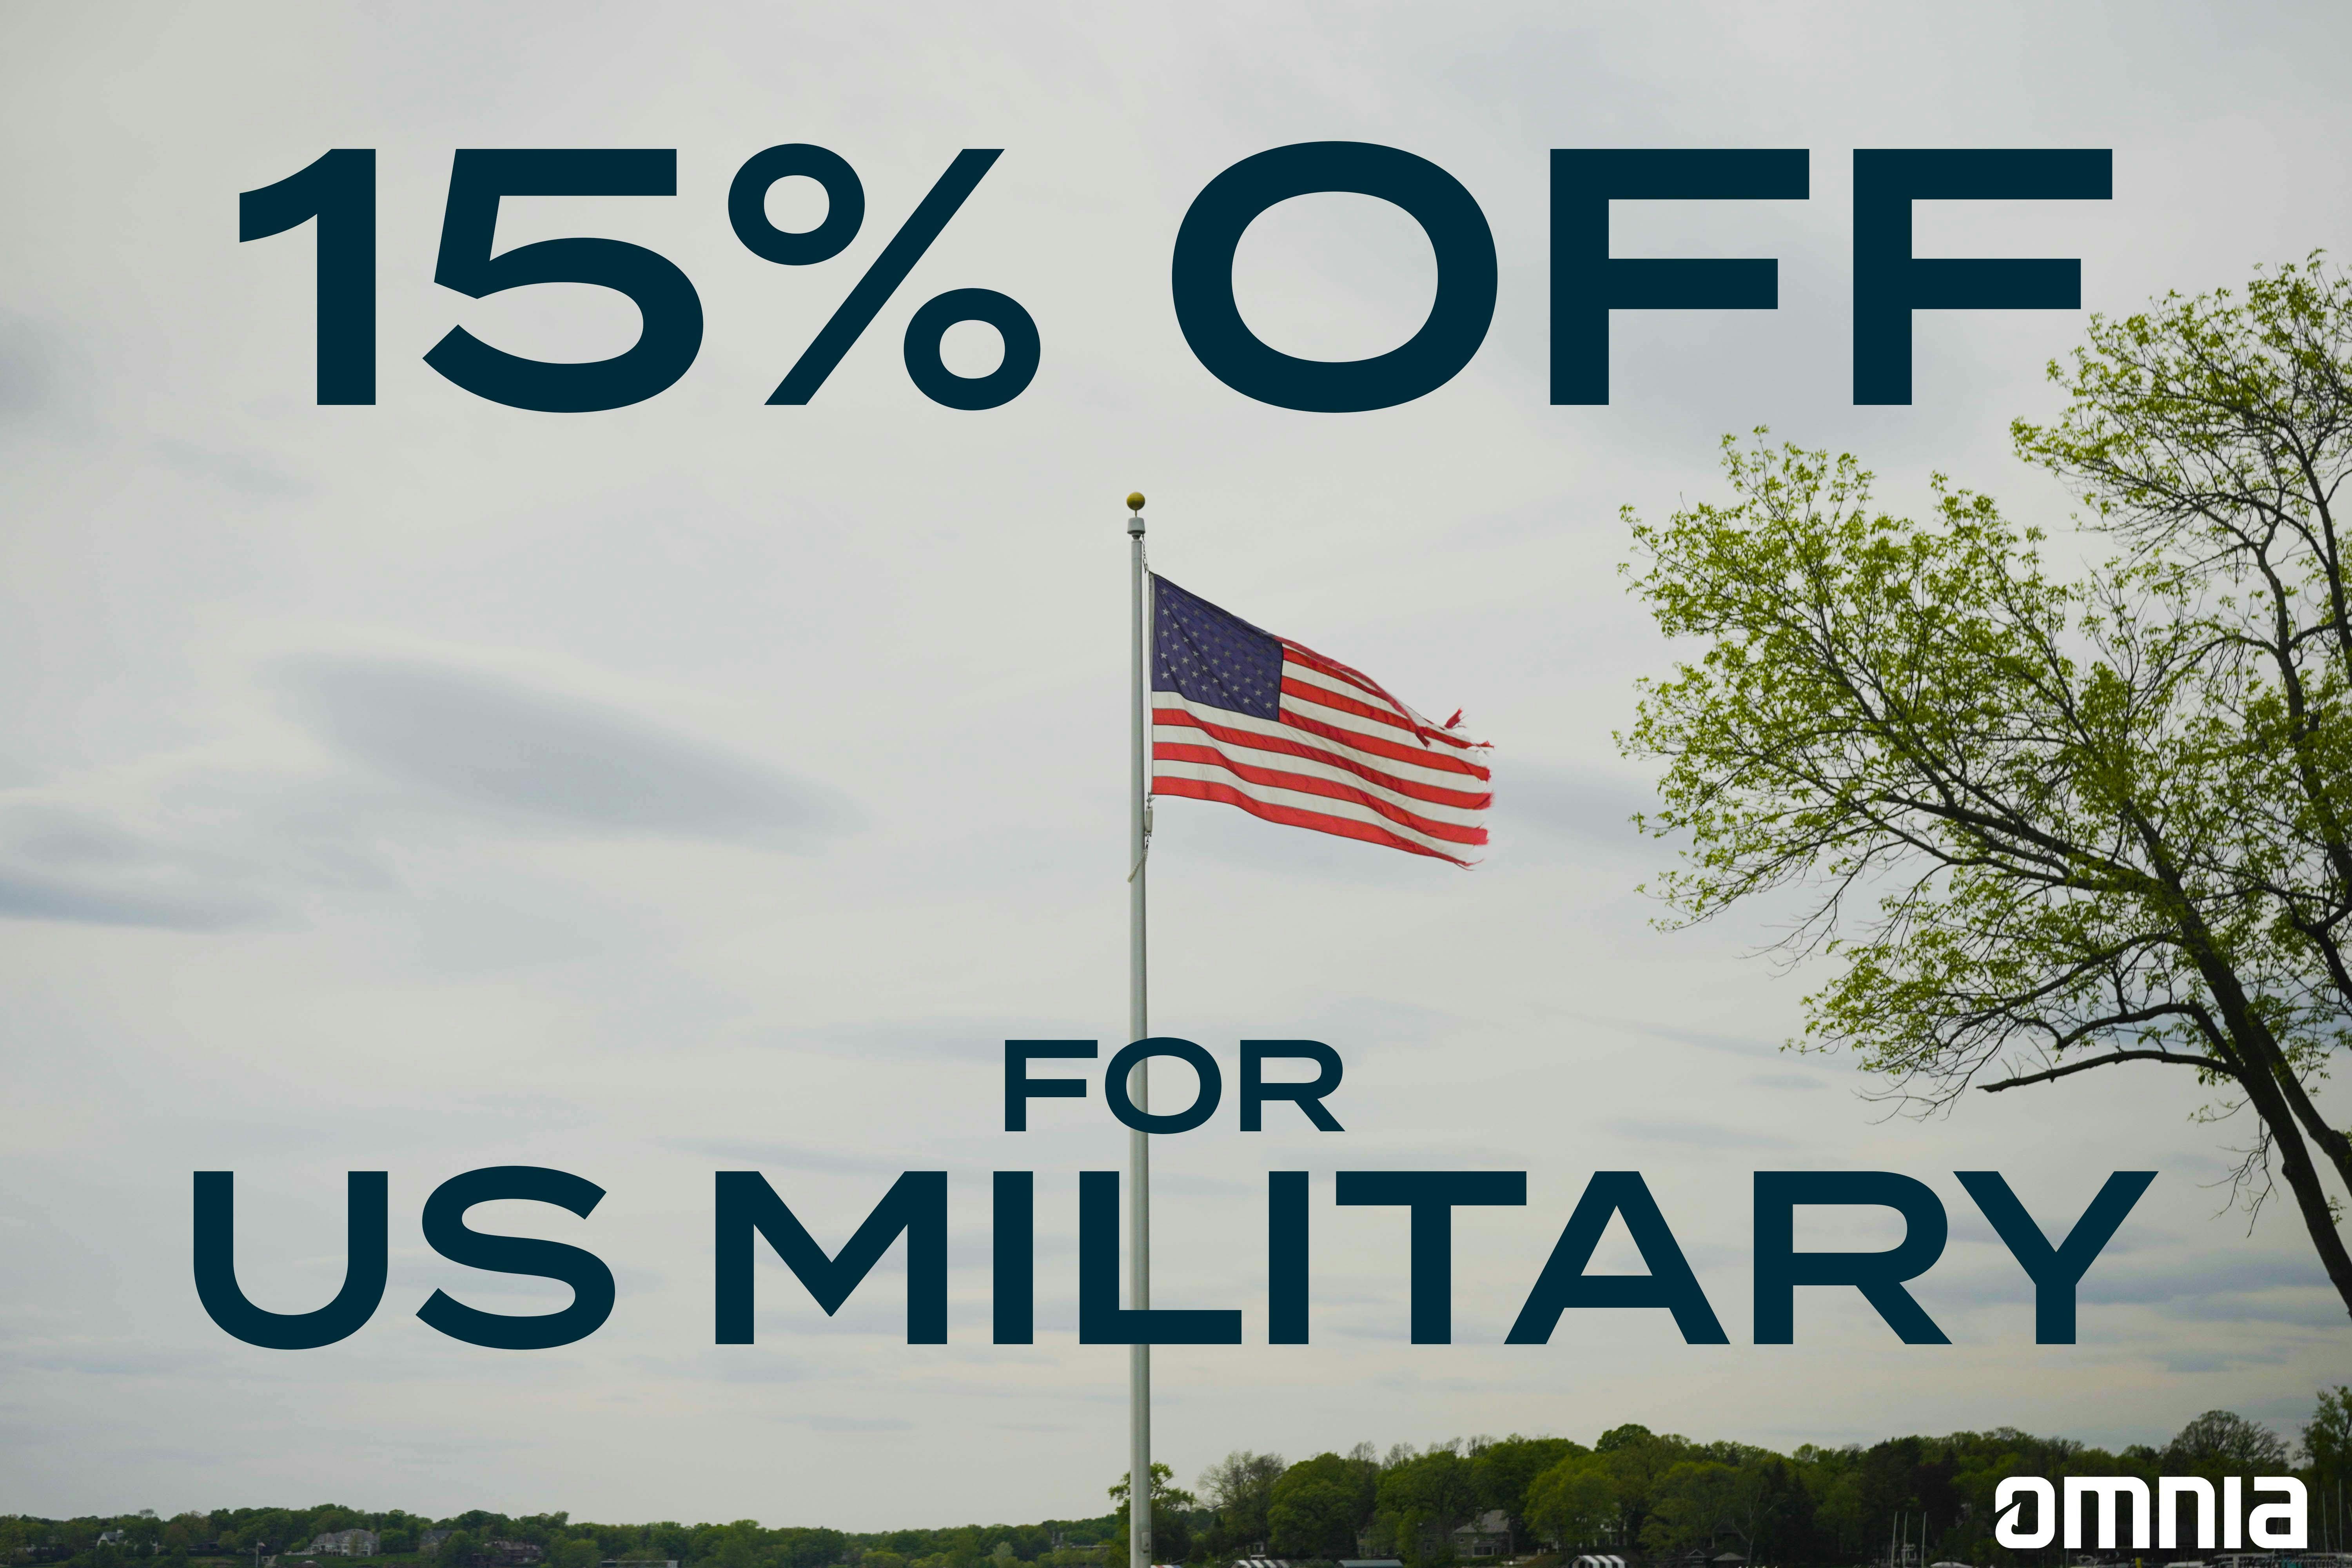 Discount for US Military Members